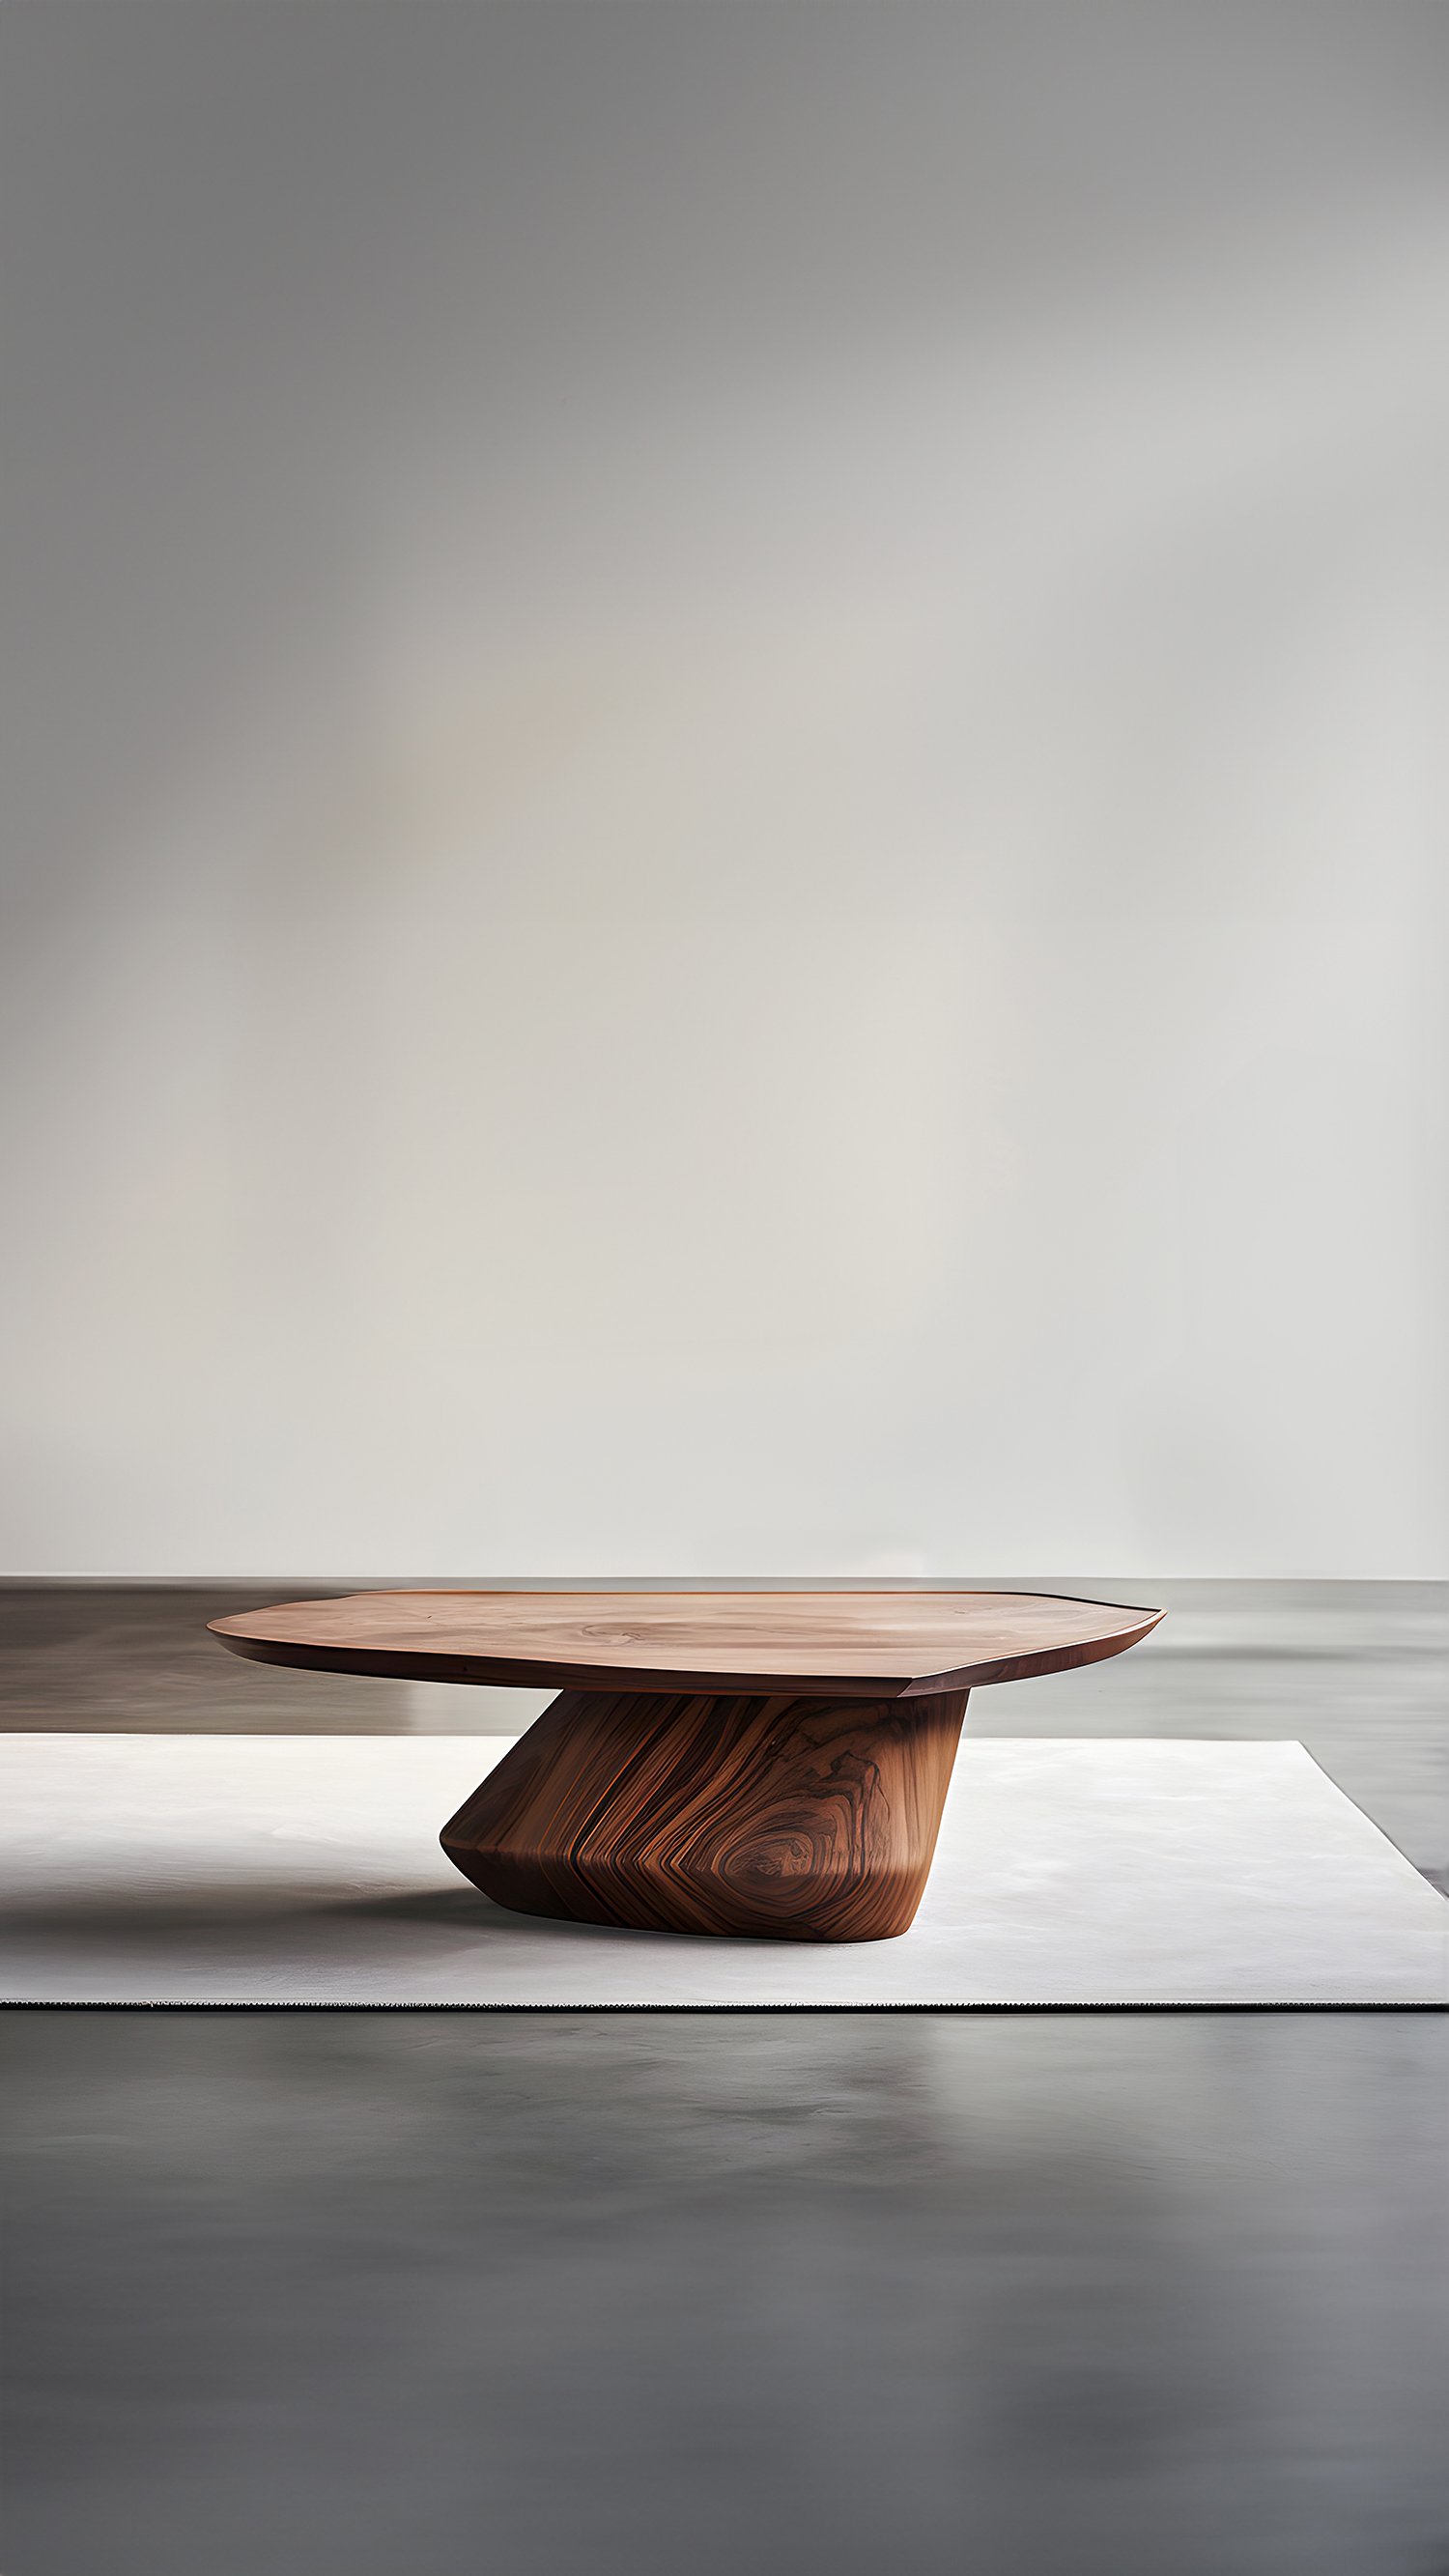 Sculptural Coffee Table Made of Solid Wood, Center Table Solace S32 by Joel Escalona — 6.jpg